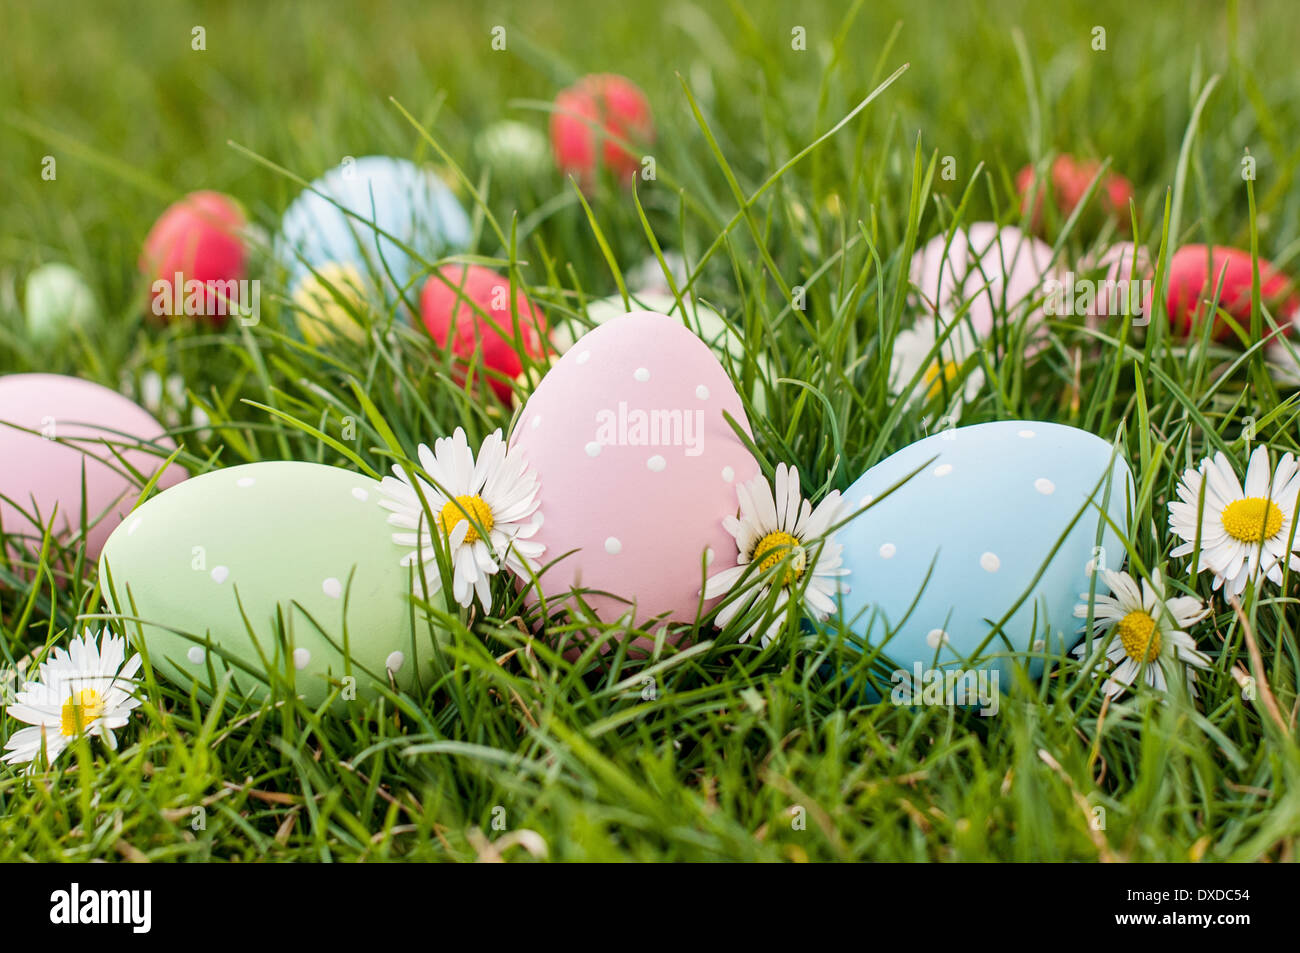 Different color Easter egg on a grass Stock Photo